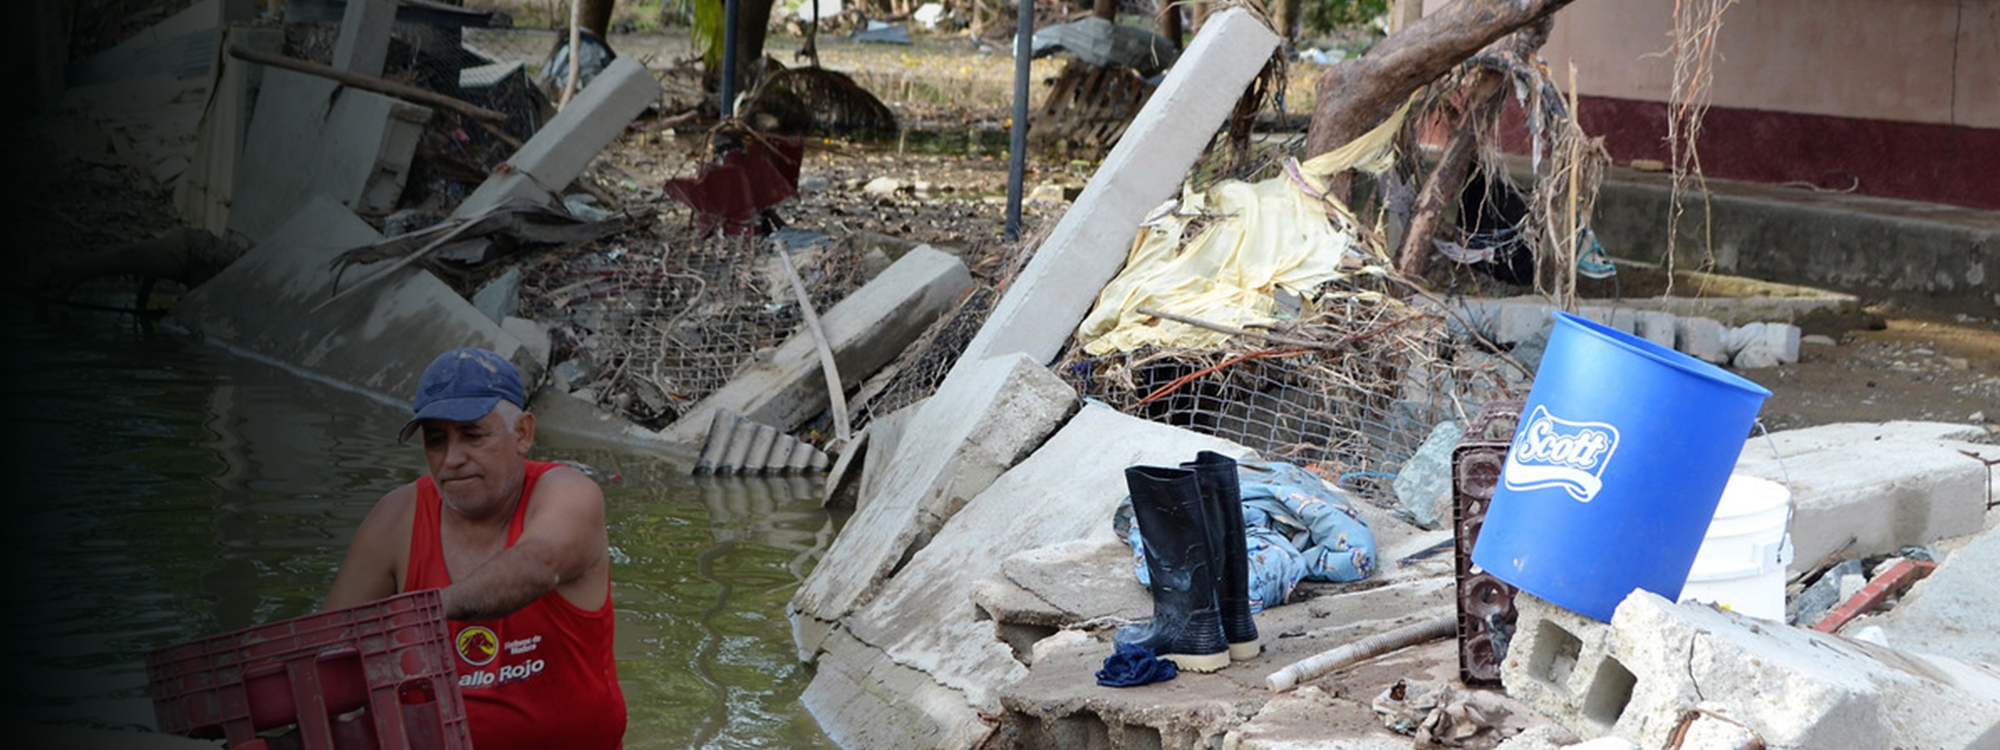 Man trying to salvage possessions from flood